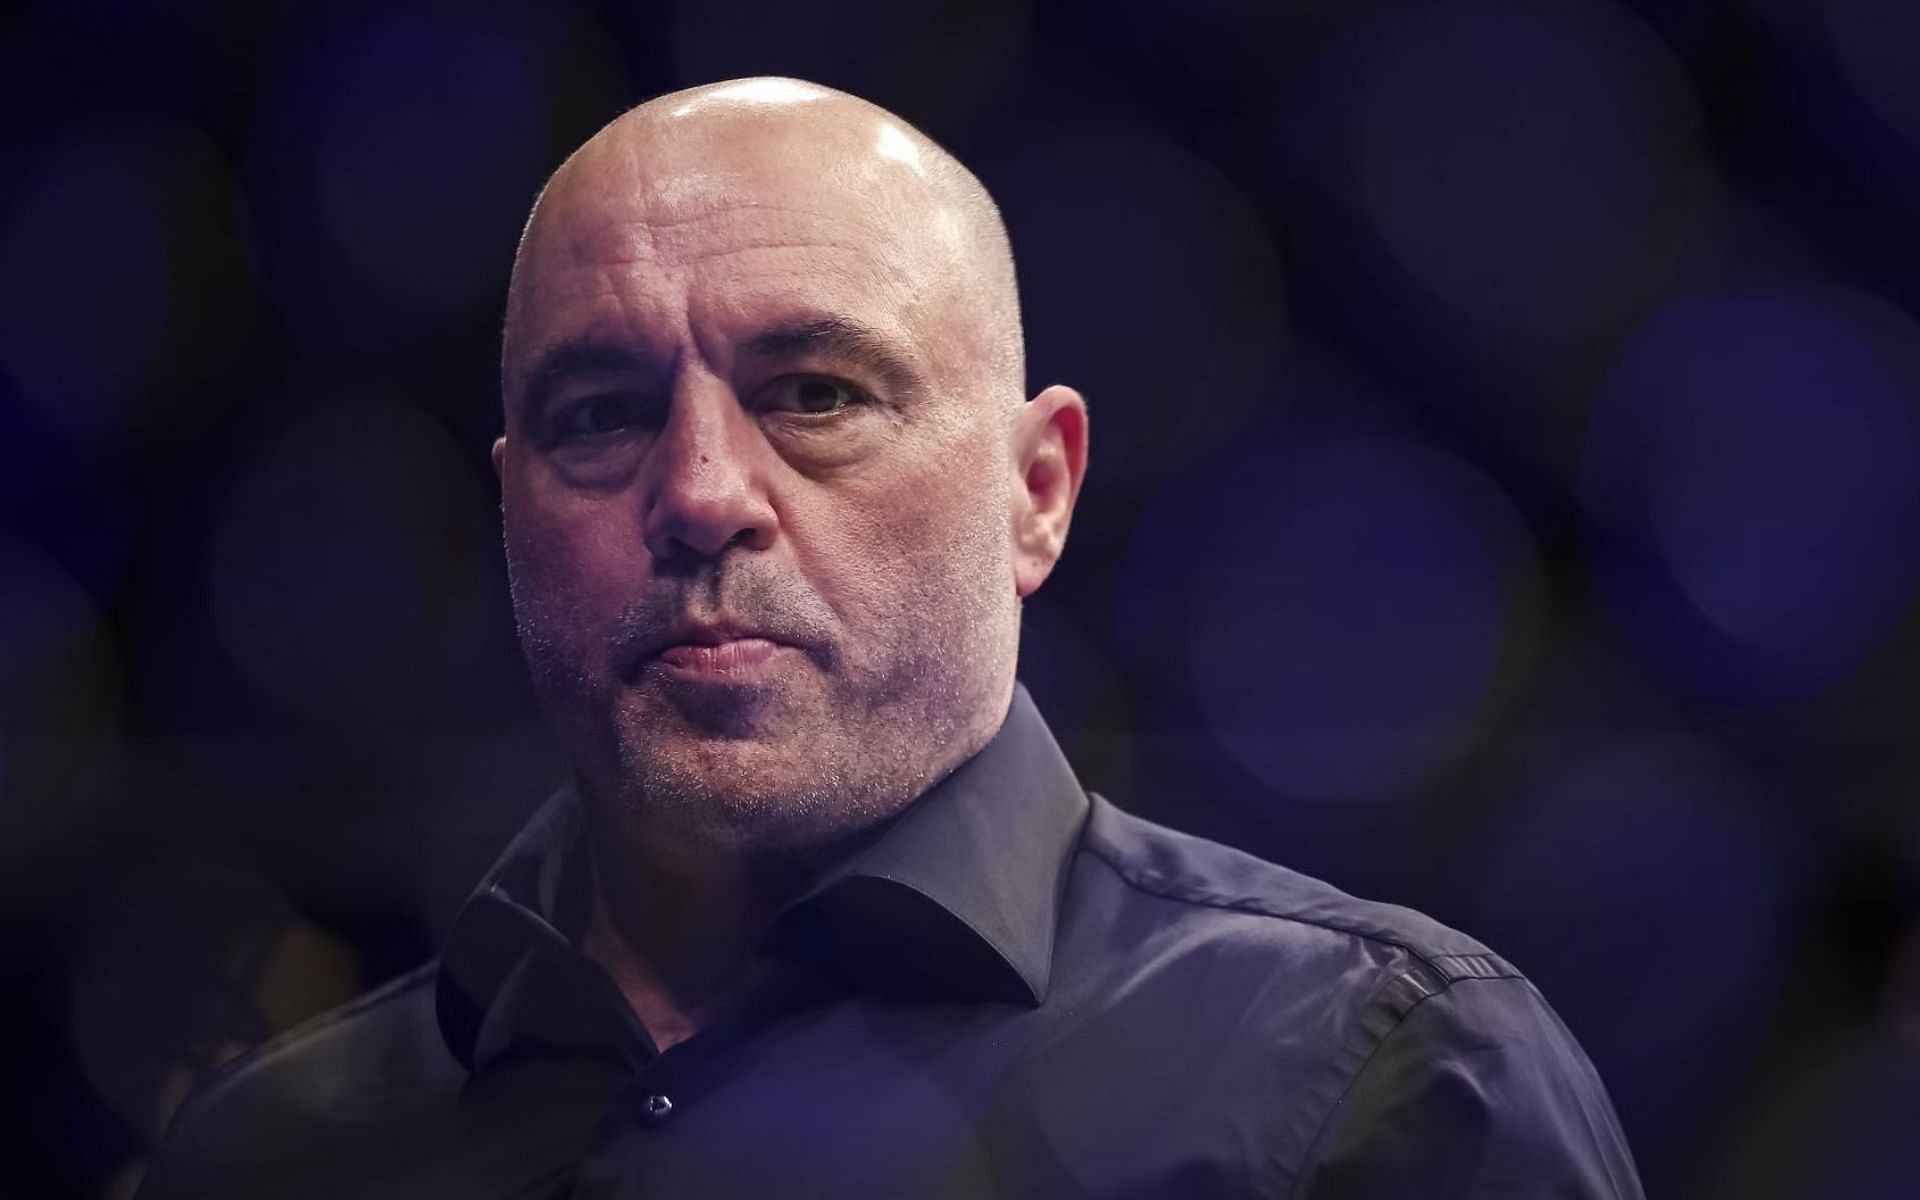 Joe Rogan explains how alcohol reduces a fighter's life inside the octagon